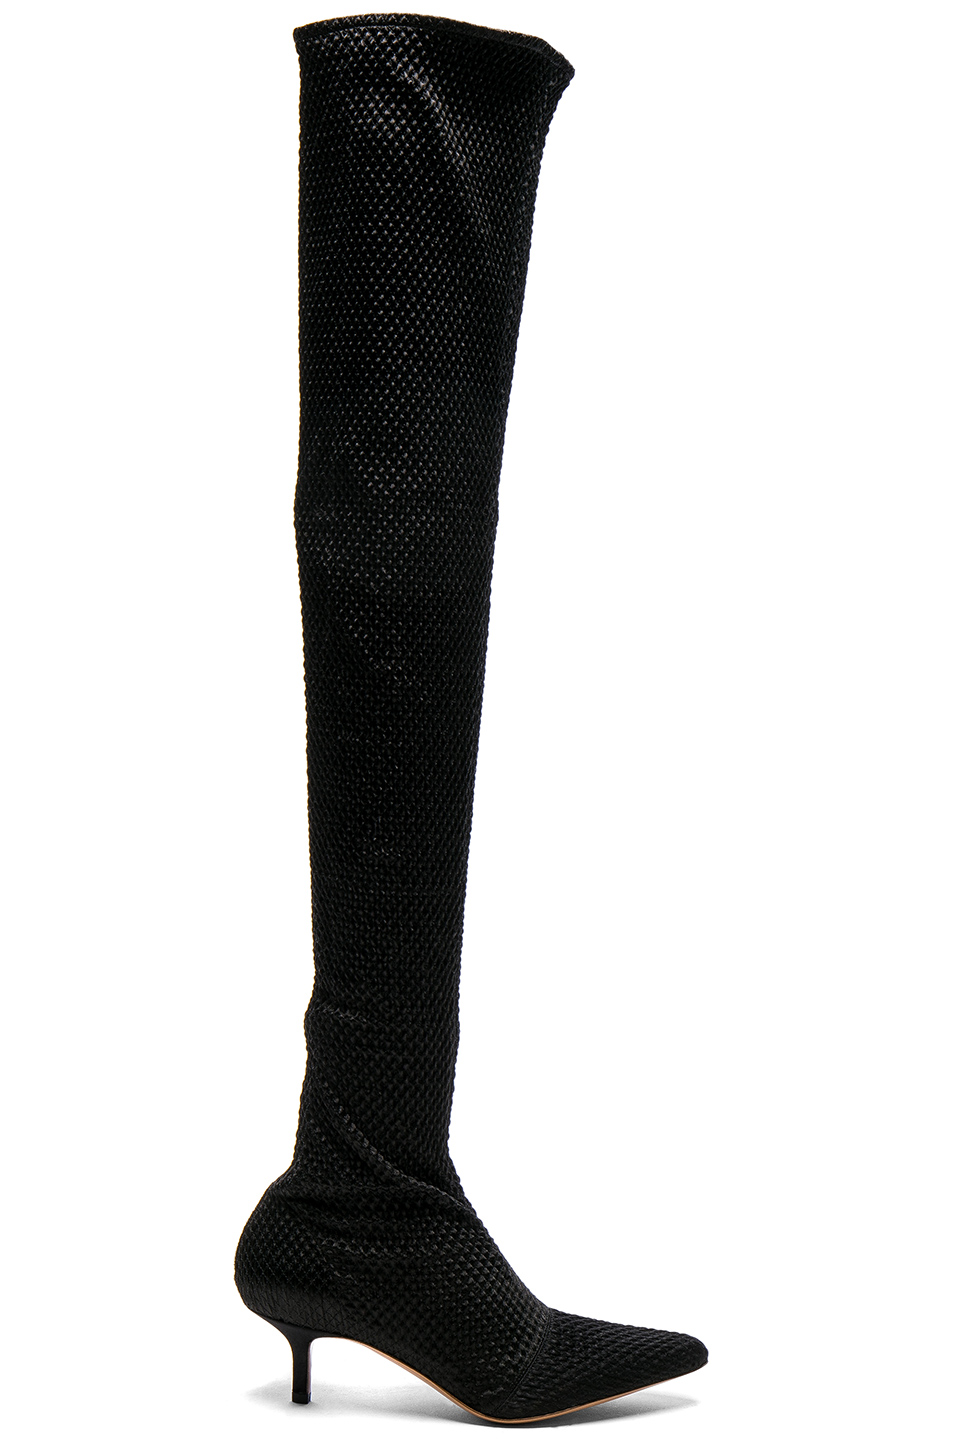 thigh high boots with short heel